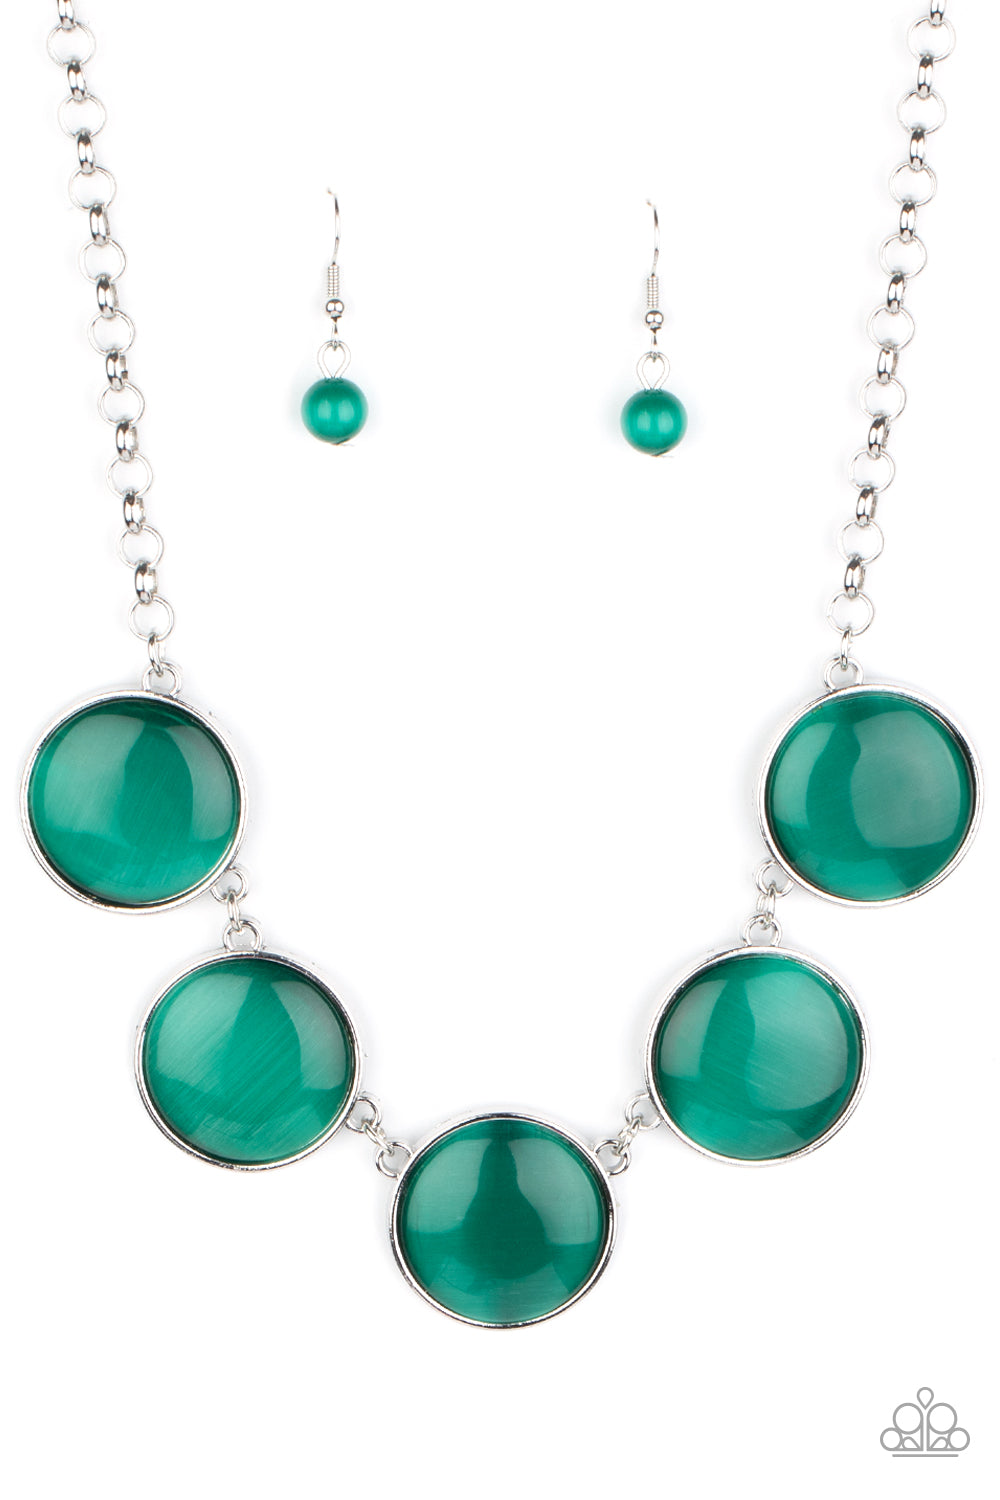 Paparazzi Ethereal Escape Green Round Cats Eye Stone Silver Necklace